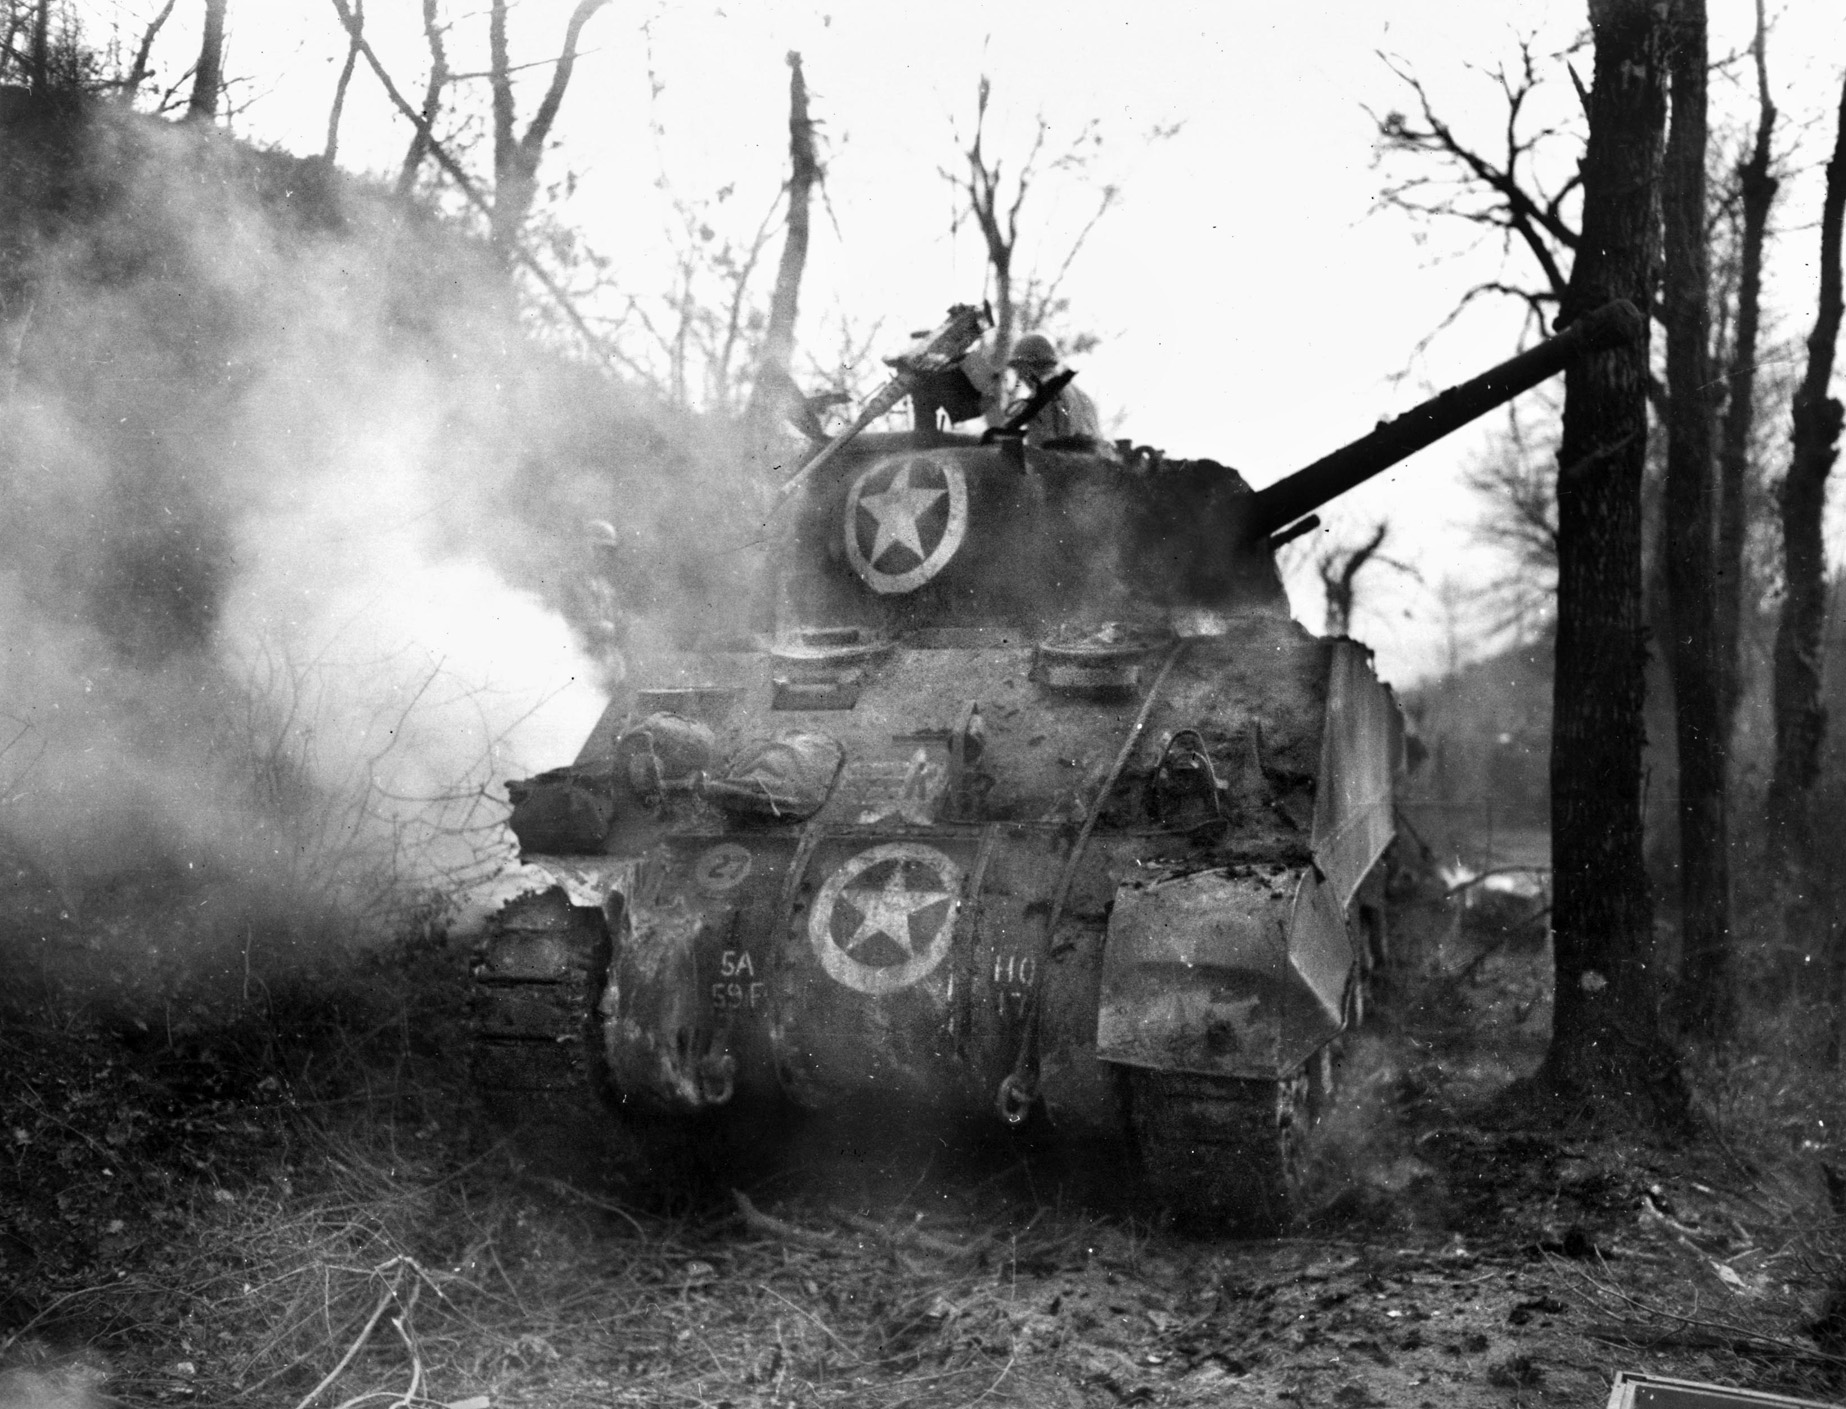 An A-4 Sherman medium tank burns after being hit by German fire during the battle for Anzio. Muddy fields confined most armor to the roads, making them easy targets.